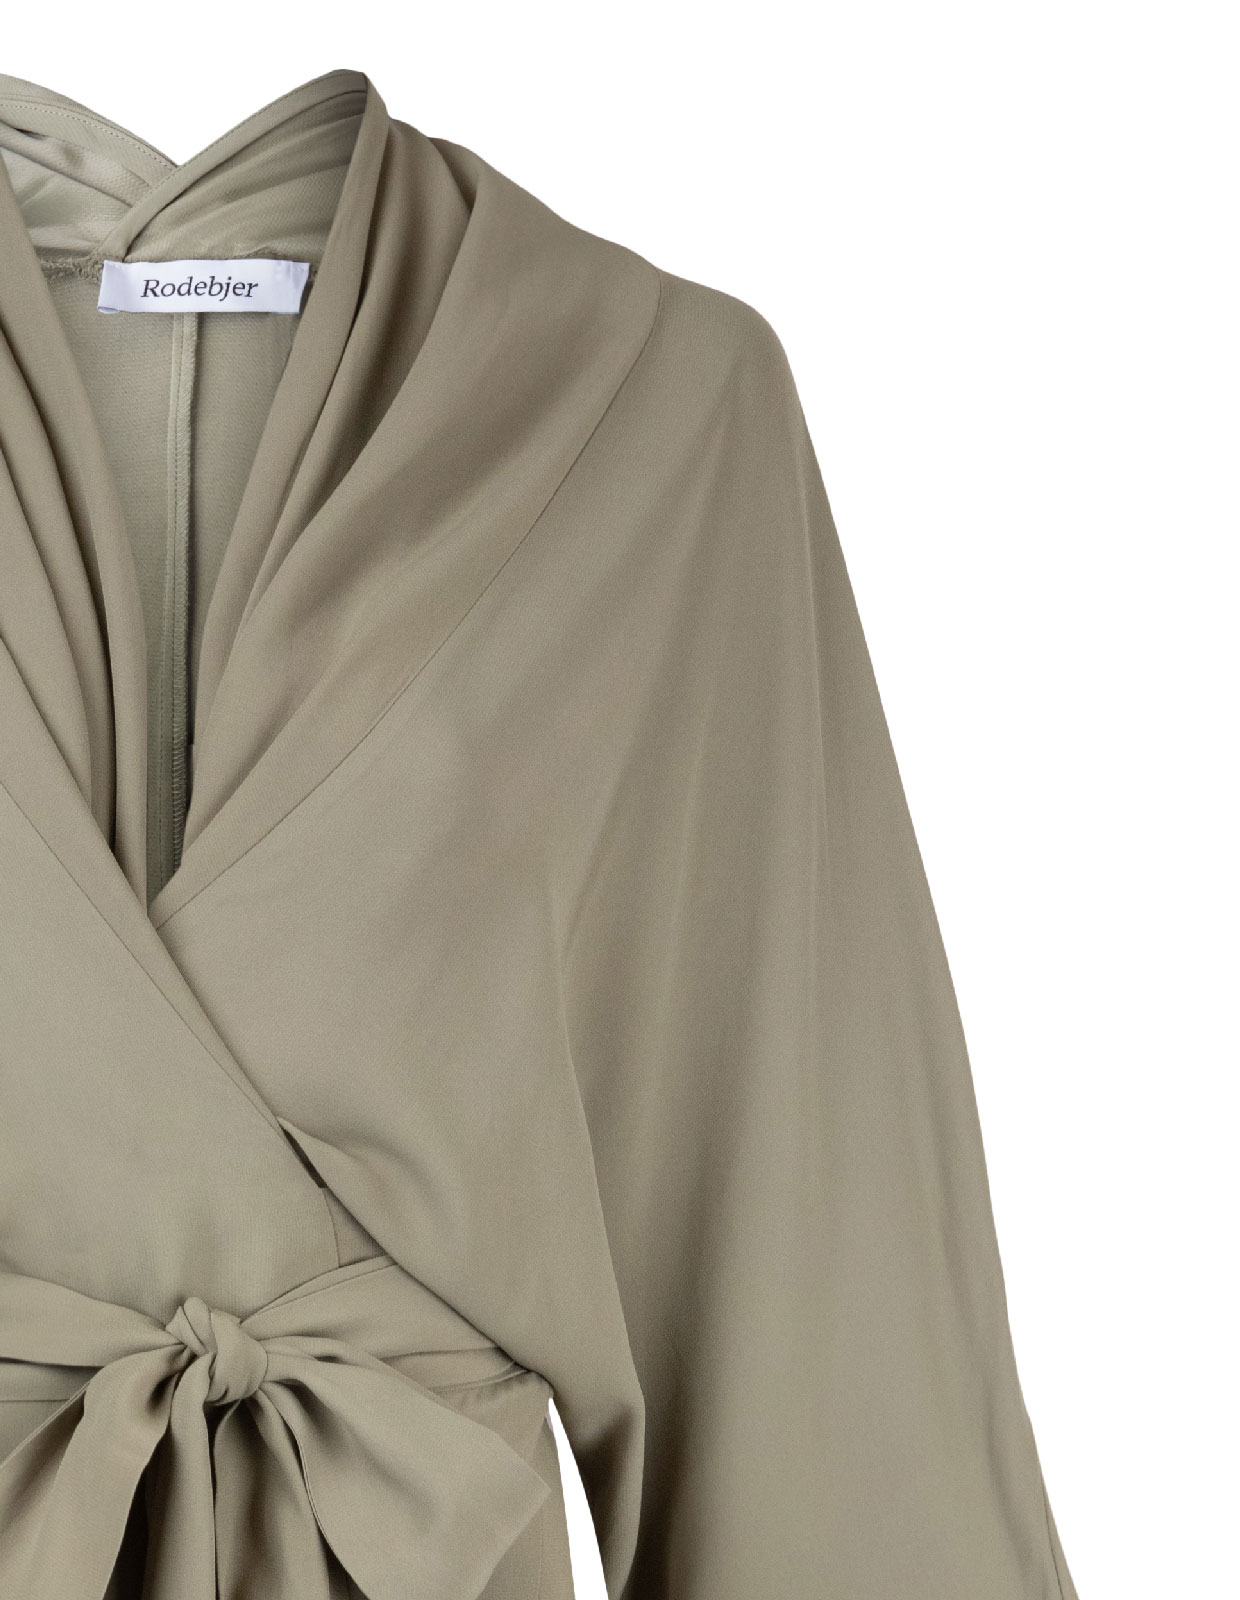 Rodebjer Kimono Tennessee Twill Olive leaf